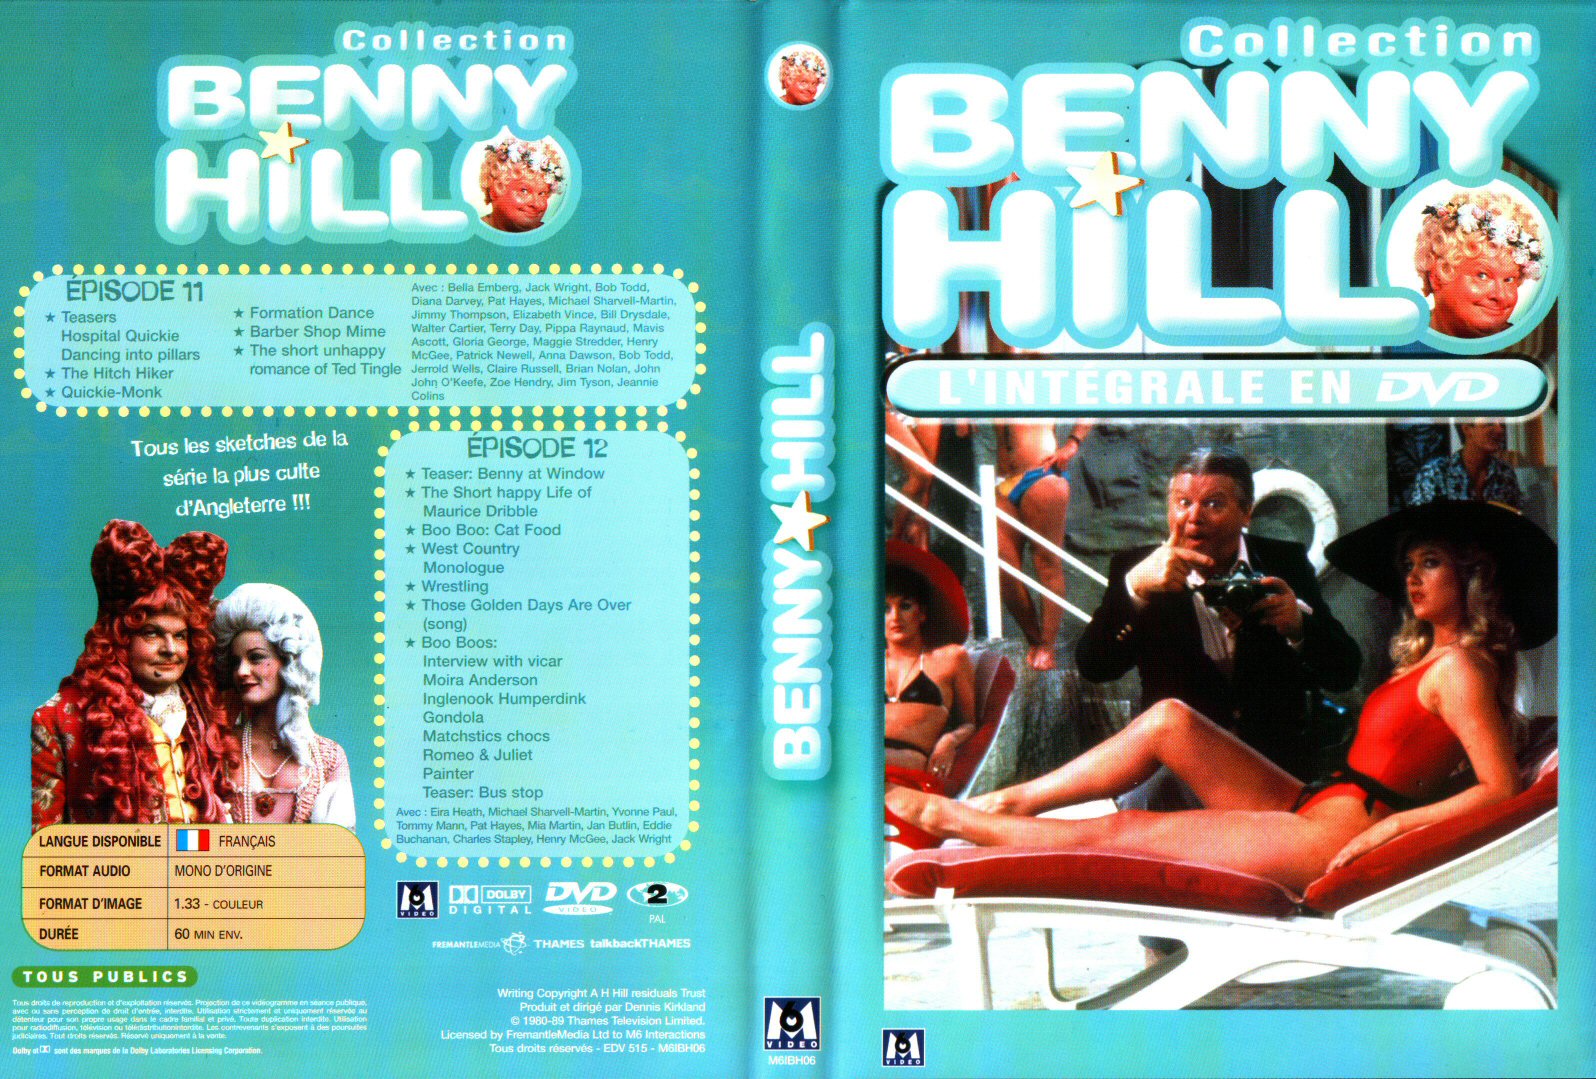 Jaquette DVD Benny Hill collection Episodes 11-12